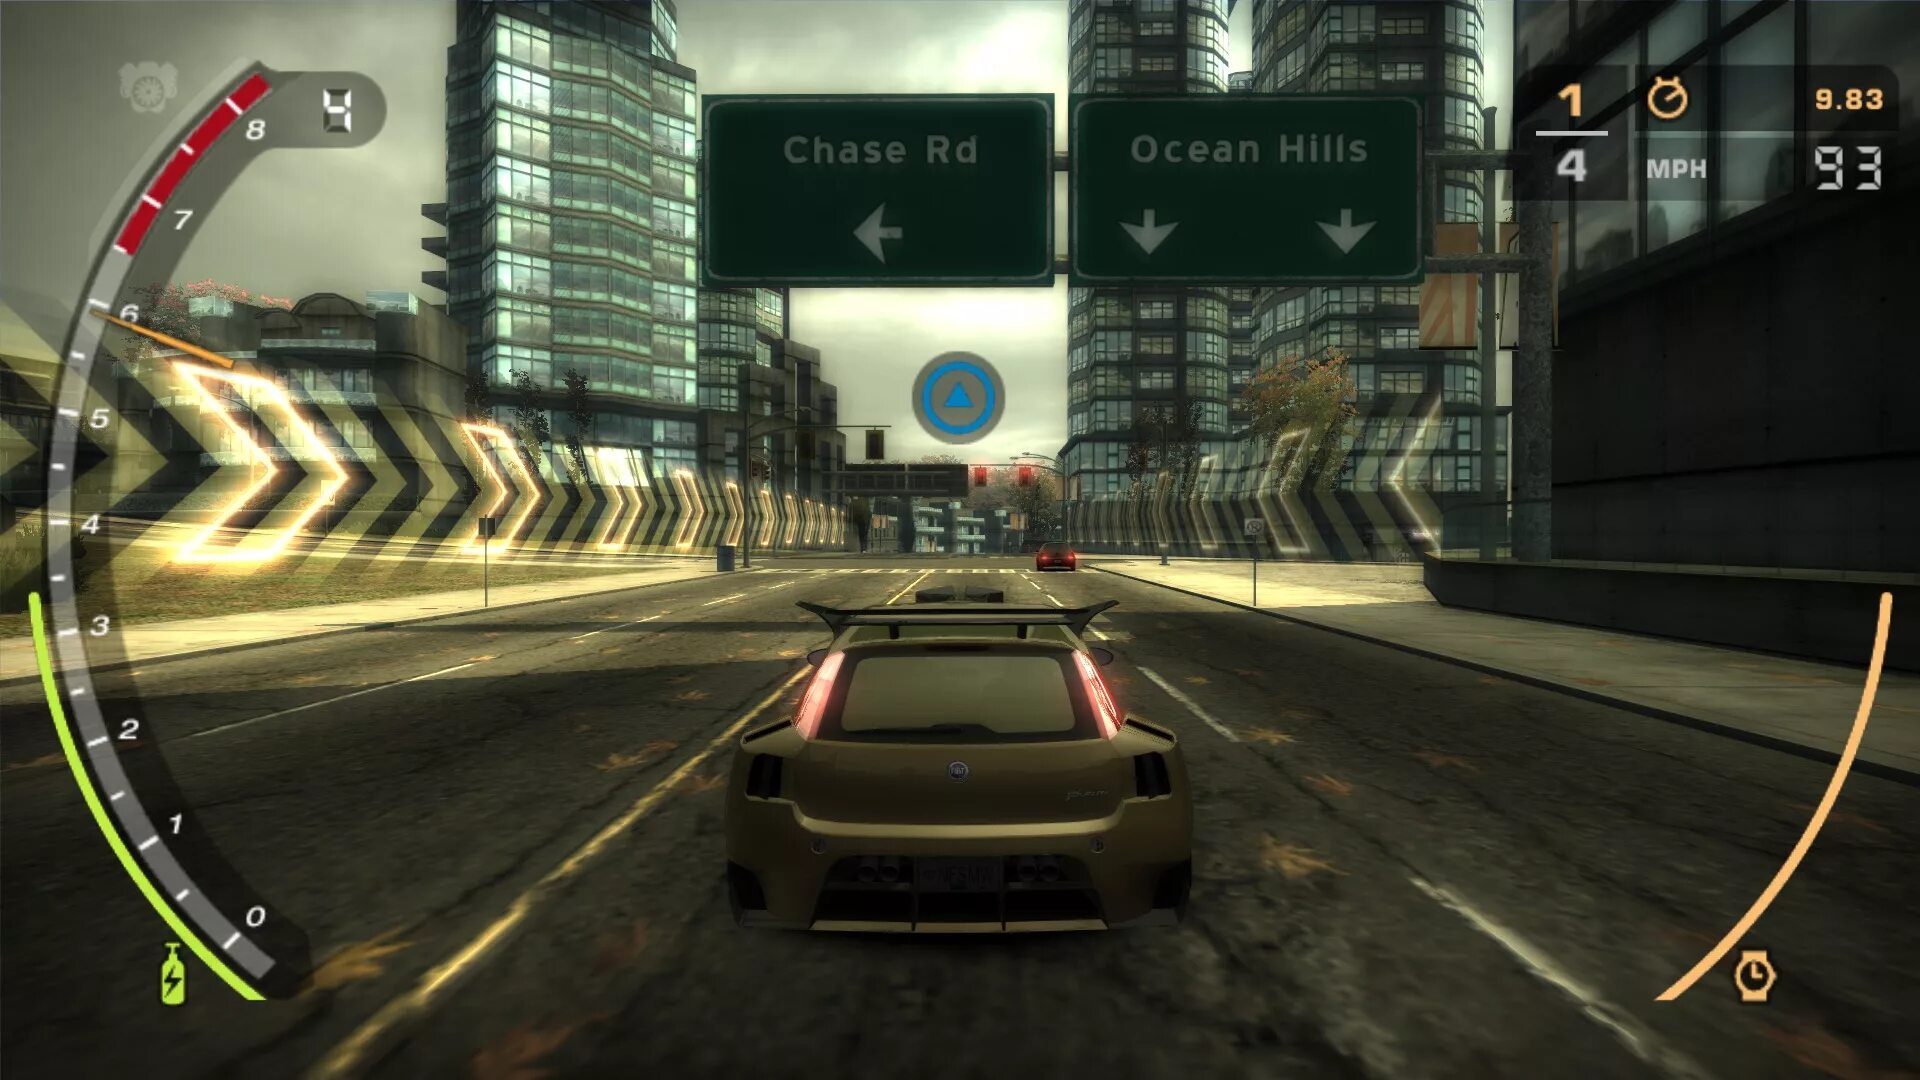 Нефорд спид мост. Most wanted 2005. Need for Speed most wanted 2005. NFS 2005. Фор СПИД 2005.